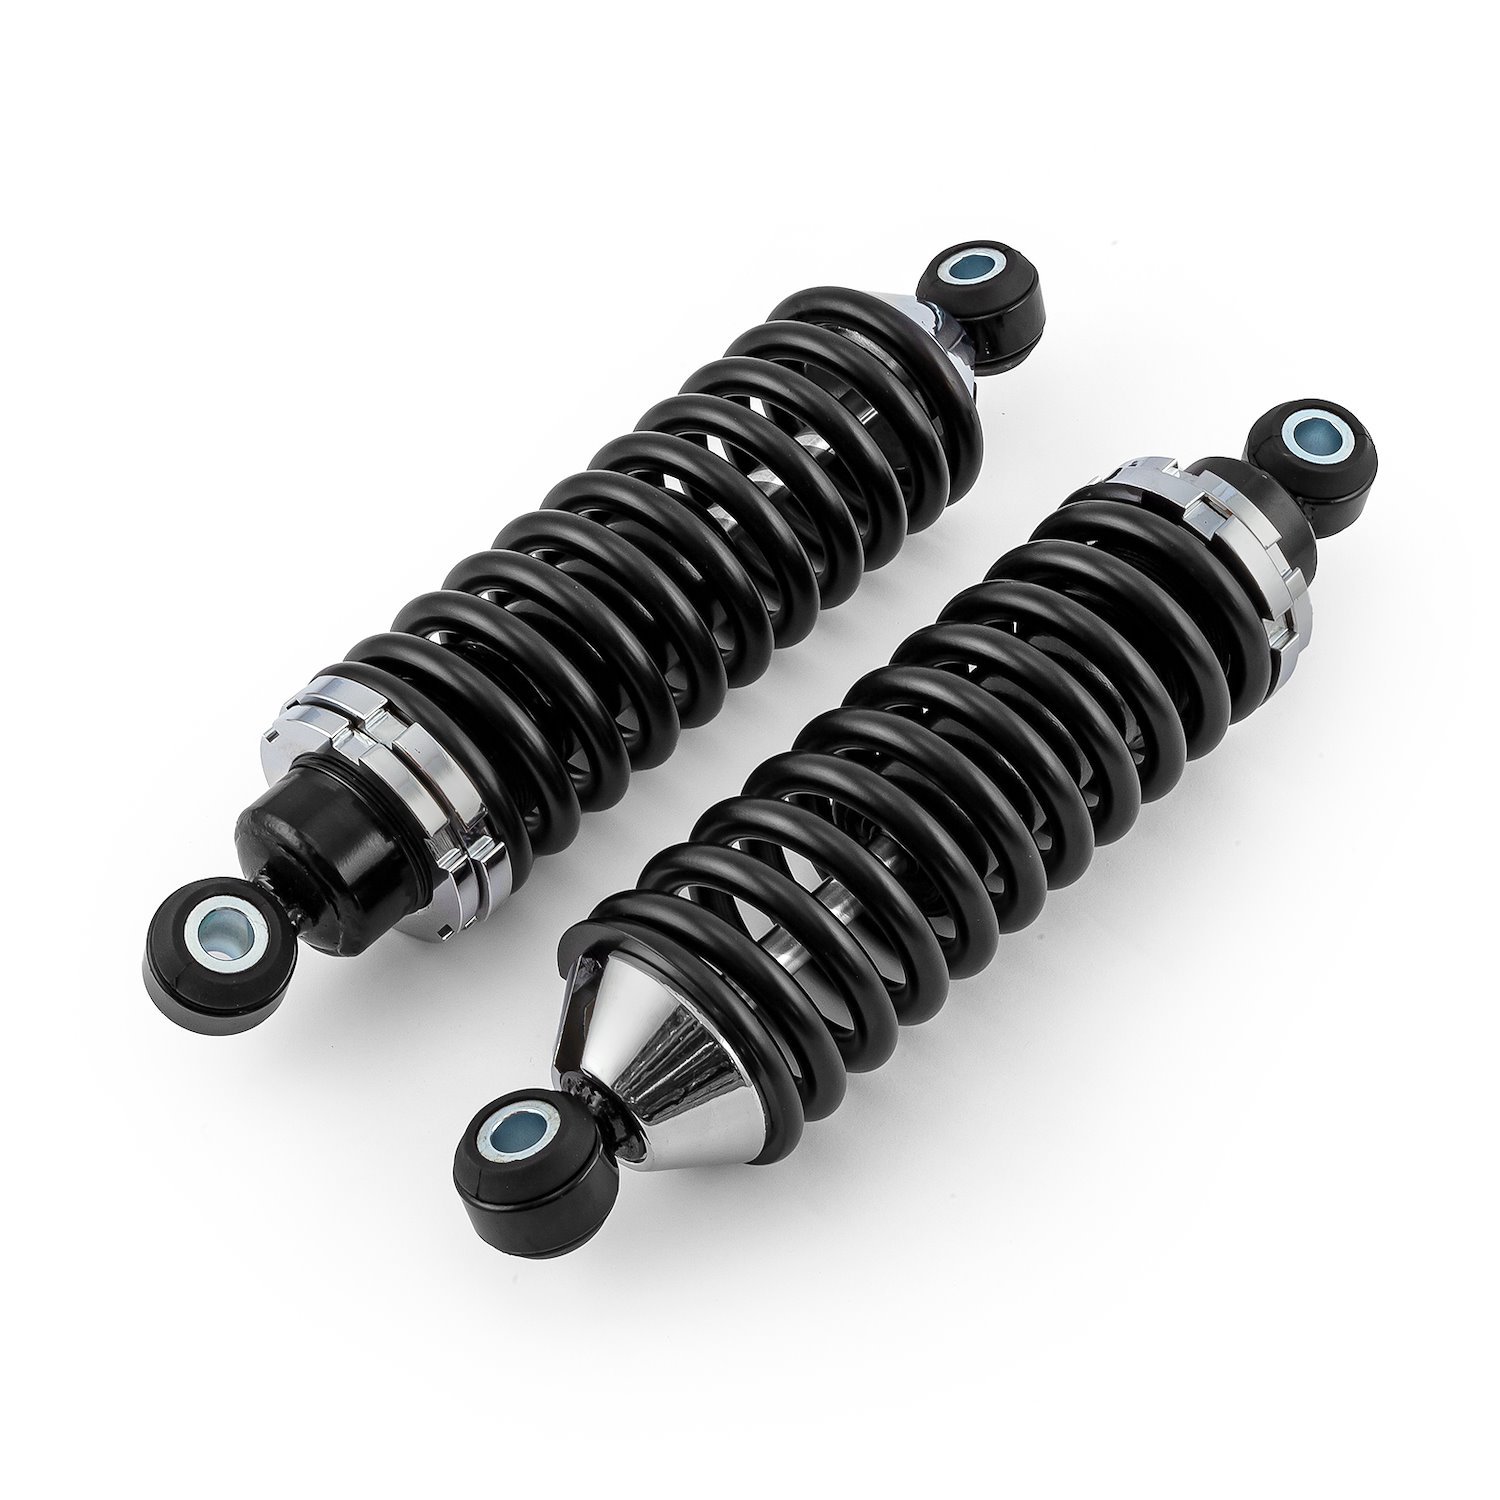 180 lbs./in. Spring Rate 12 Coil Over Shock Assemblies Adjustable Pair